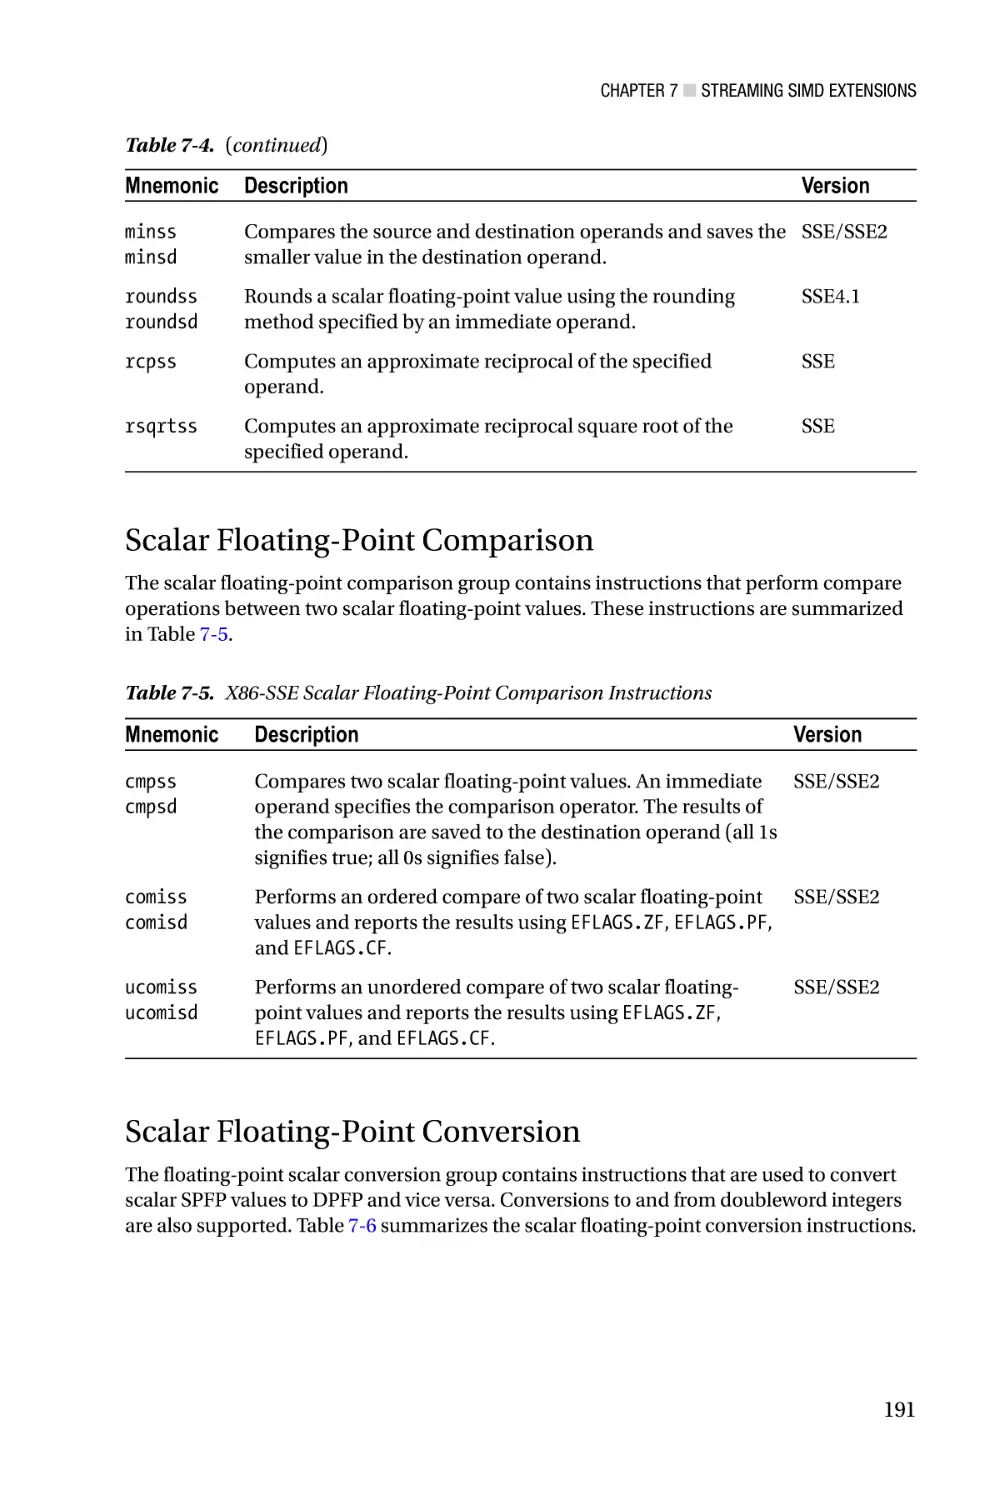 Scalar Floating-Point Comparison
Scalar Floating-Point Conversion